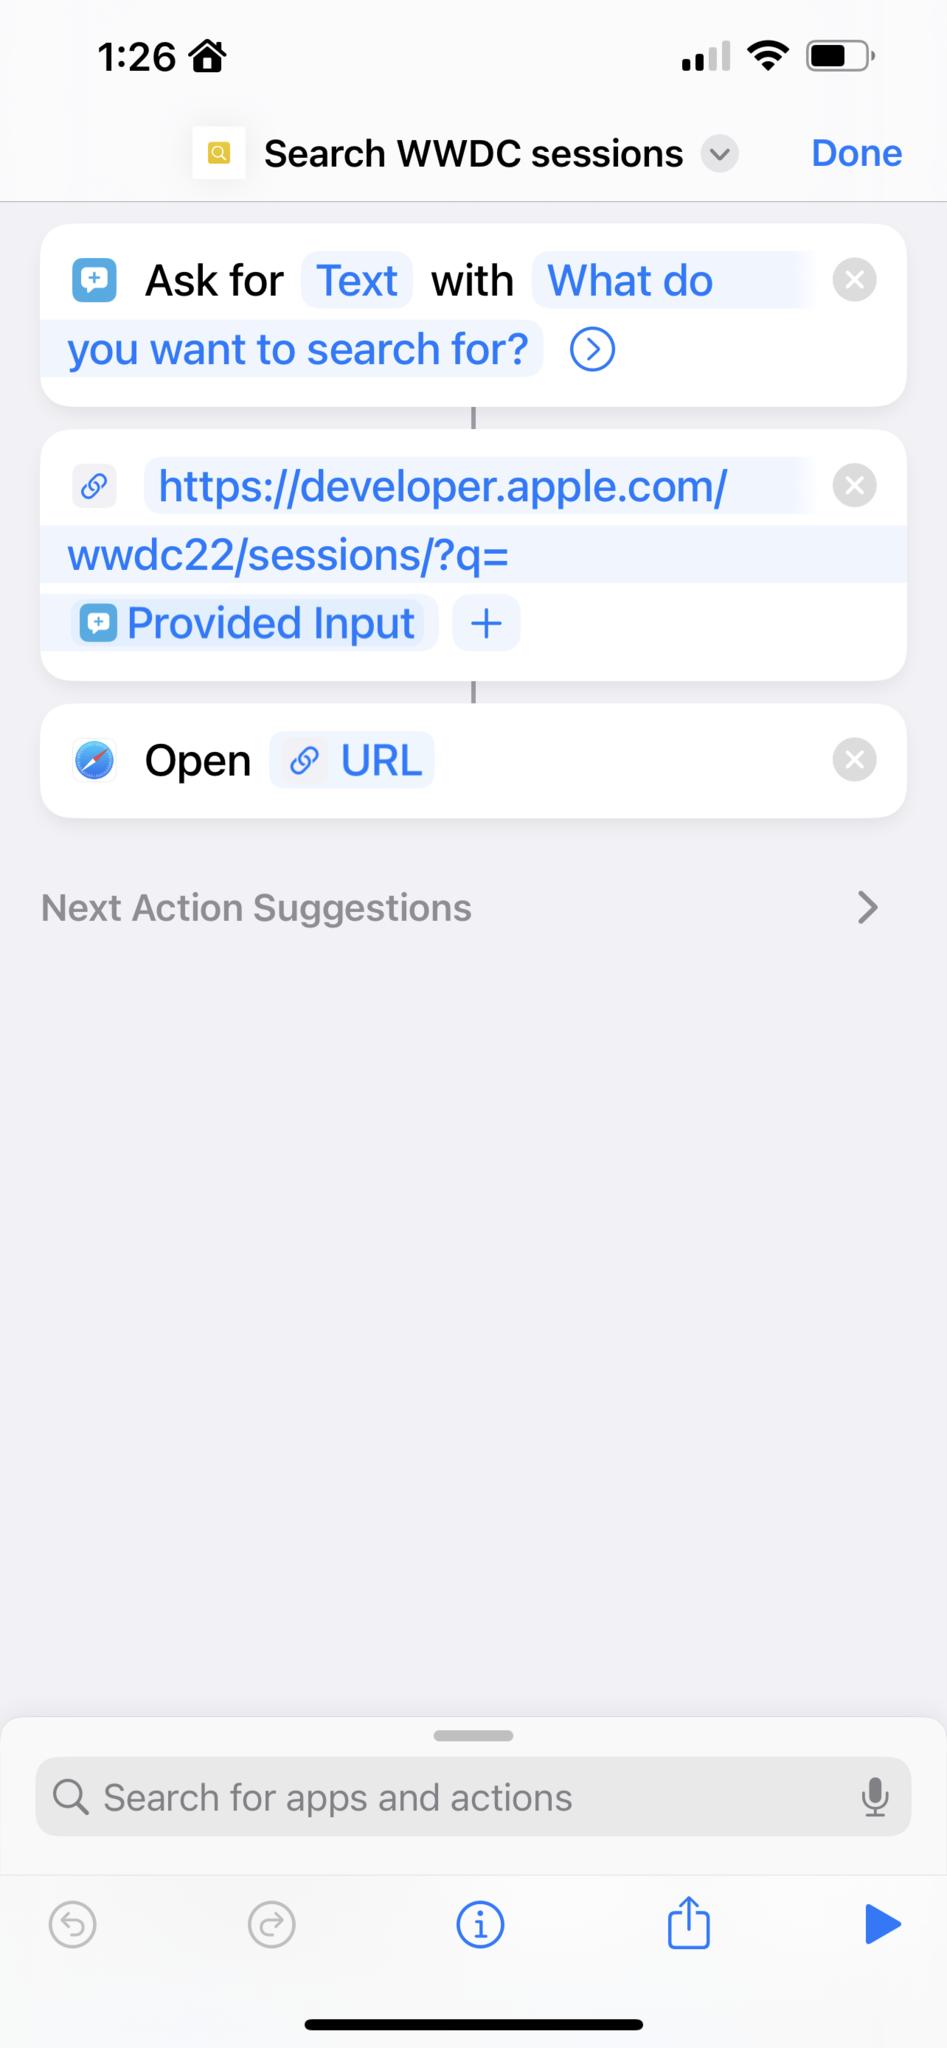 Screenshot showing the "Search WWDC" sessions" shortcut that includes a prompt for a search input, the URL using that query, and the Open URL action.